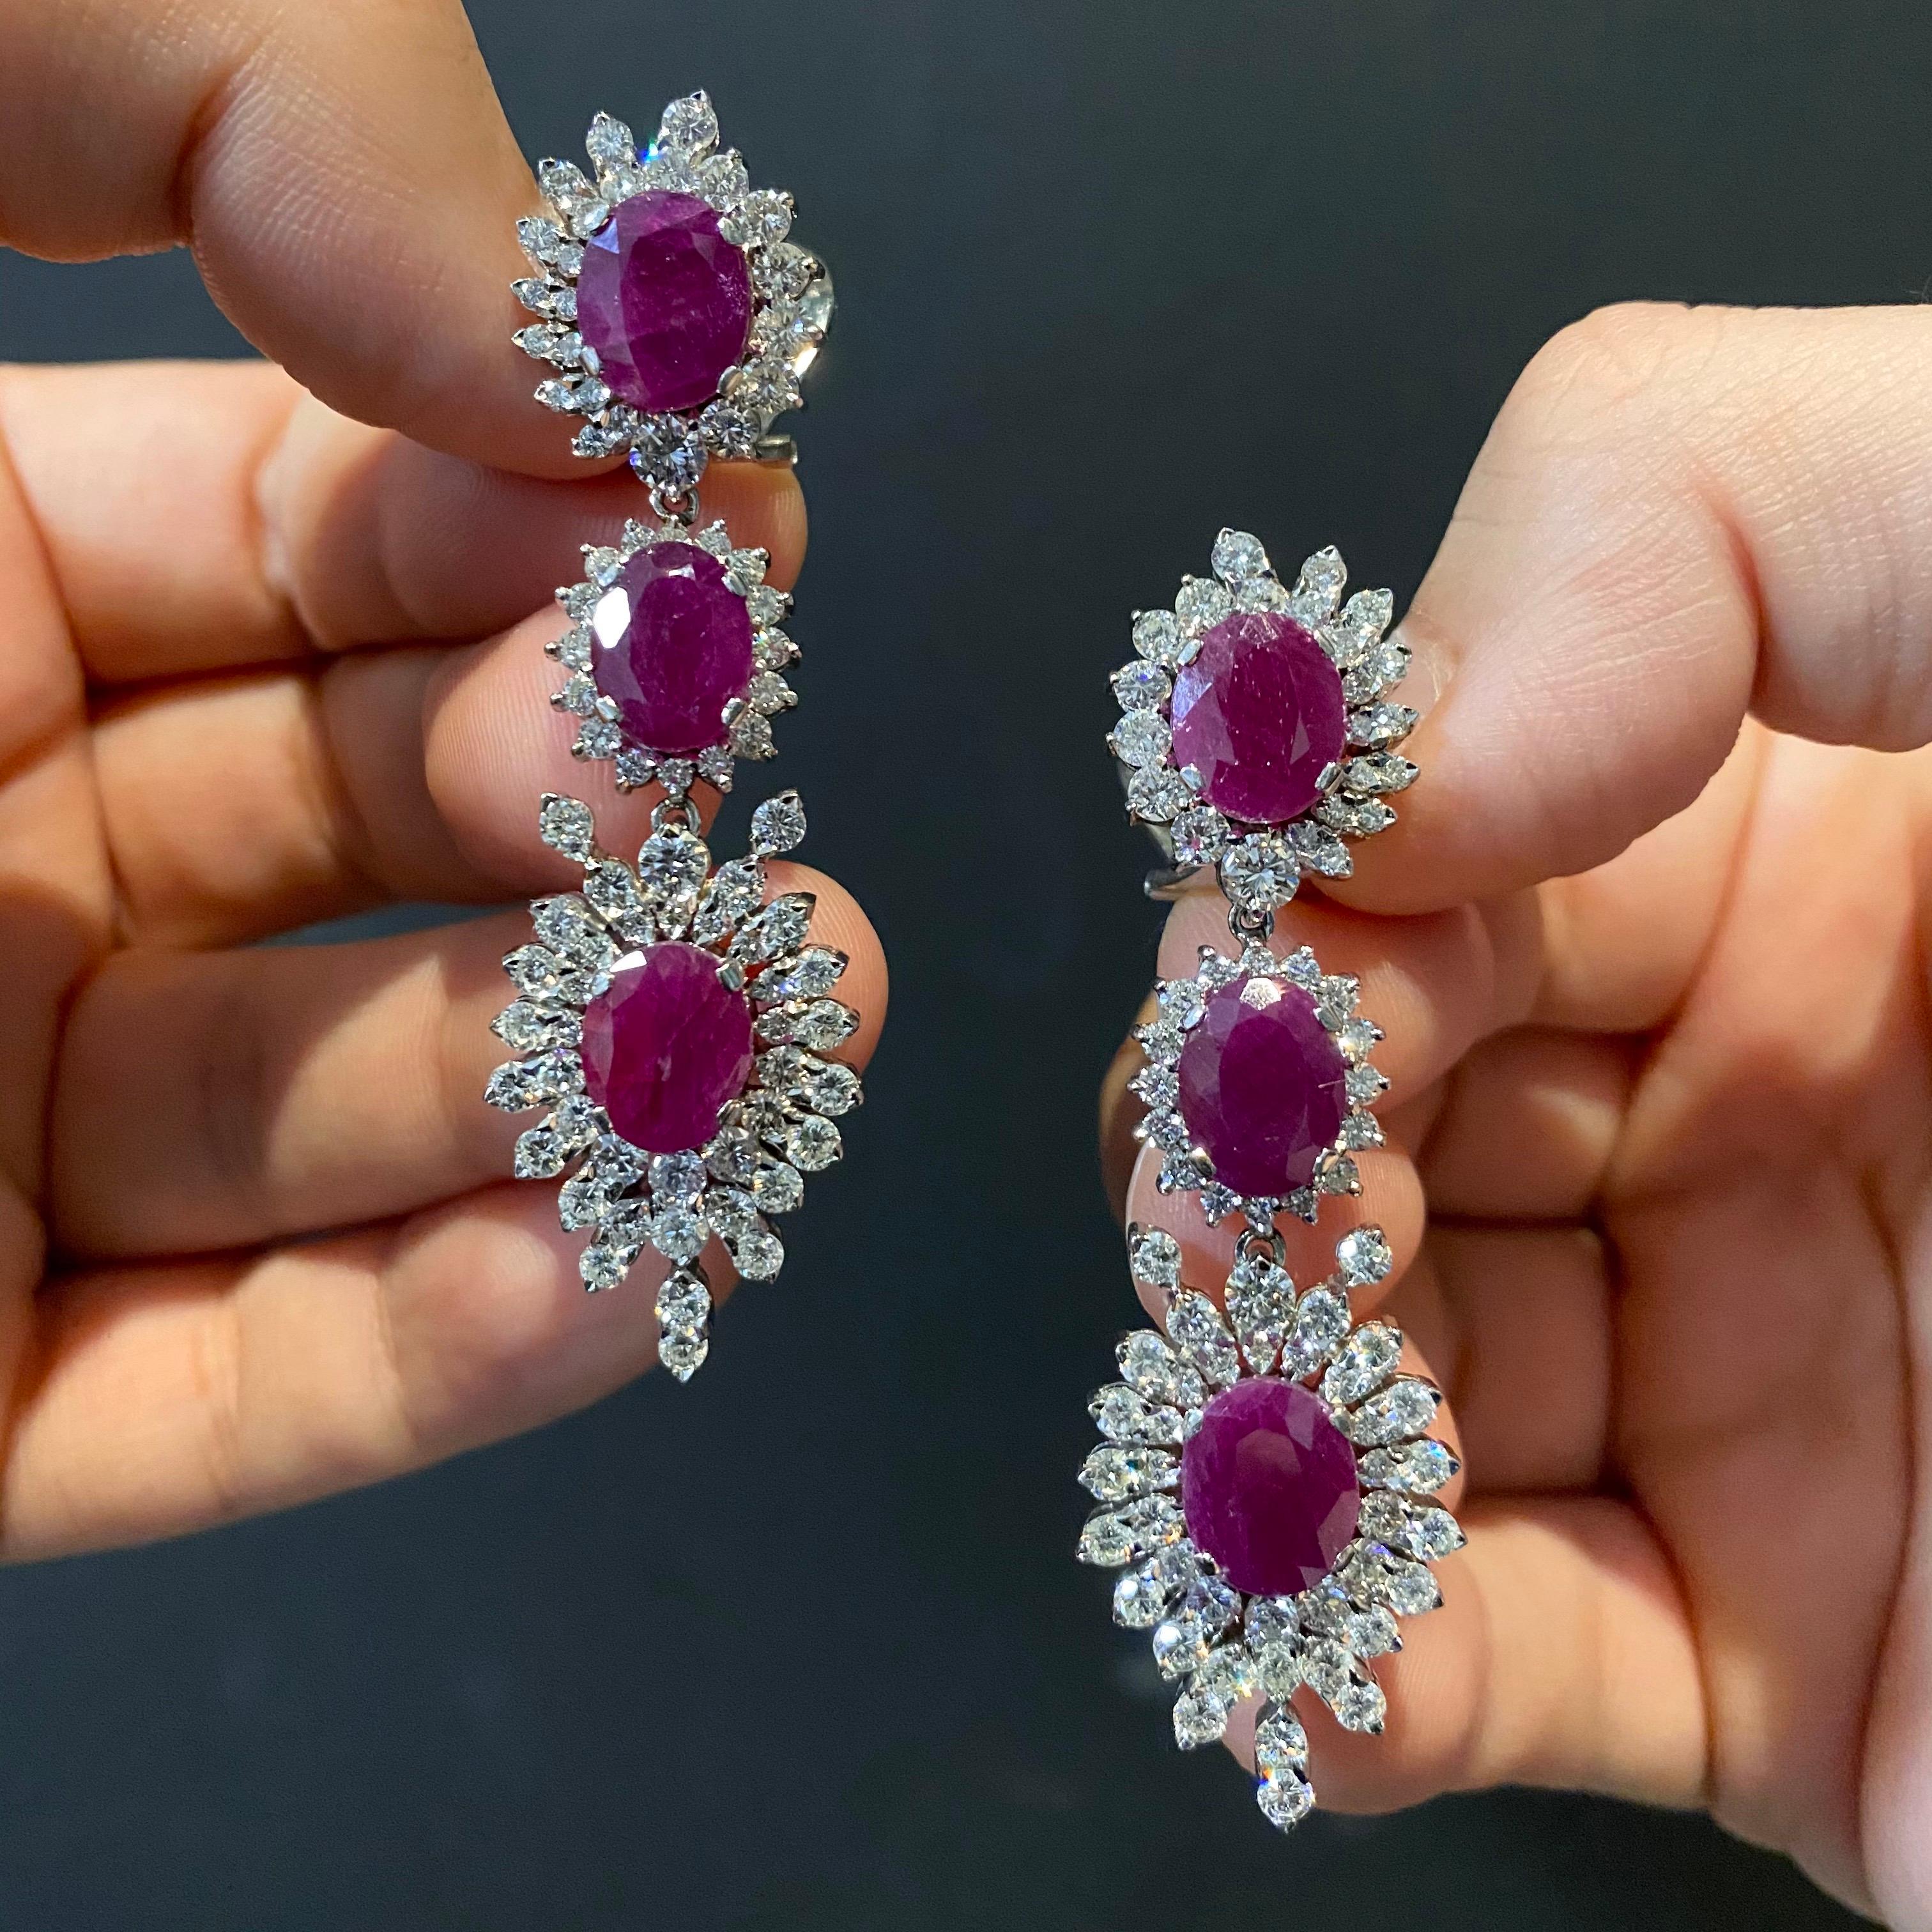 A Pair of Mid-Century 15.23ct Ruby and 8.10ct Diamond Cluster Drop Earrings in Platinum and 19.2 Karat White Gold, circa 1950s/1960s. Each earring is composed of three vertically articulated oval-shape ruby and round brilliant-cut diamond clusters